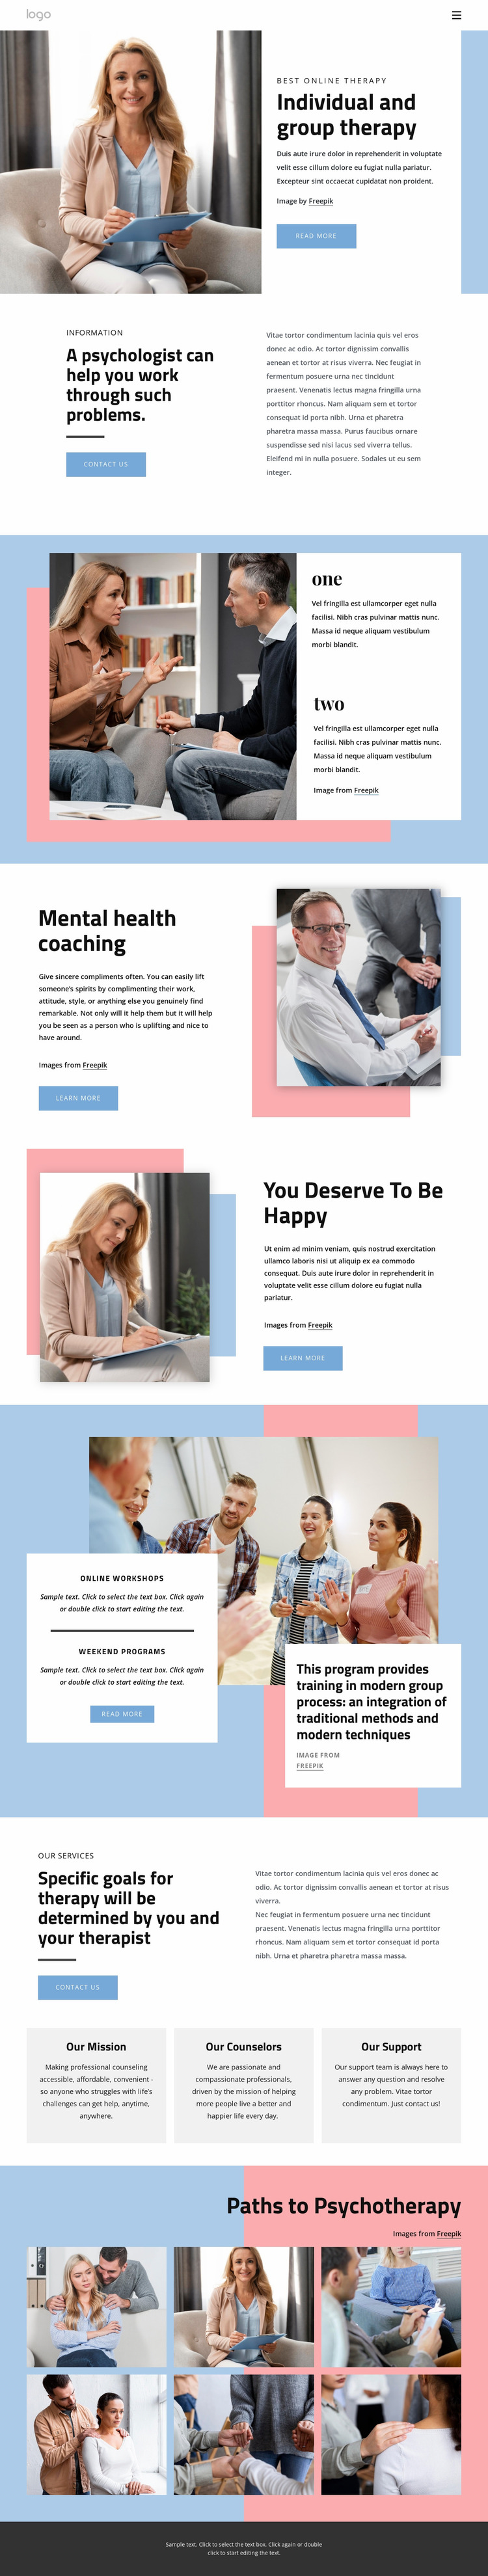 Undividual and group therapy Website Mockup